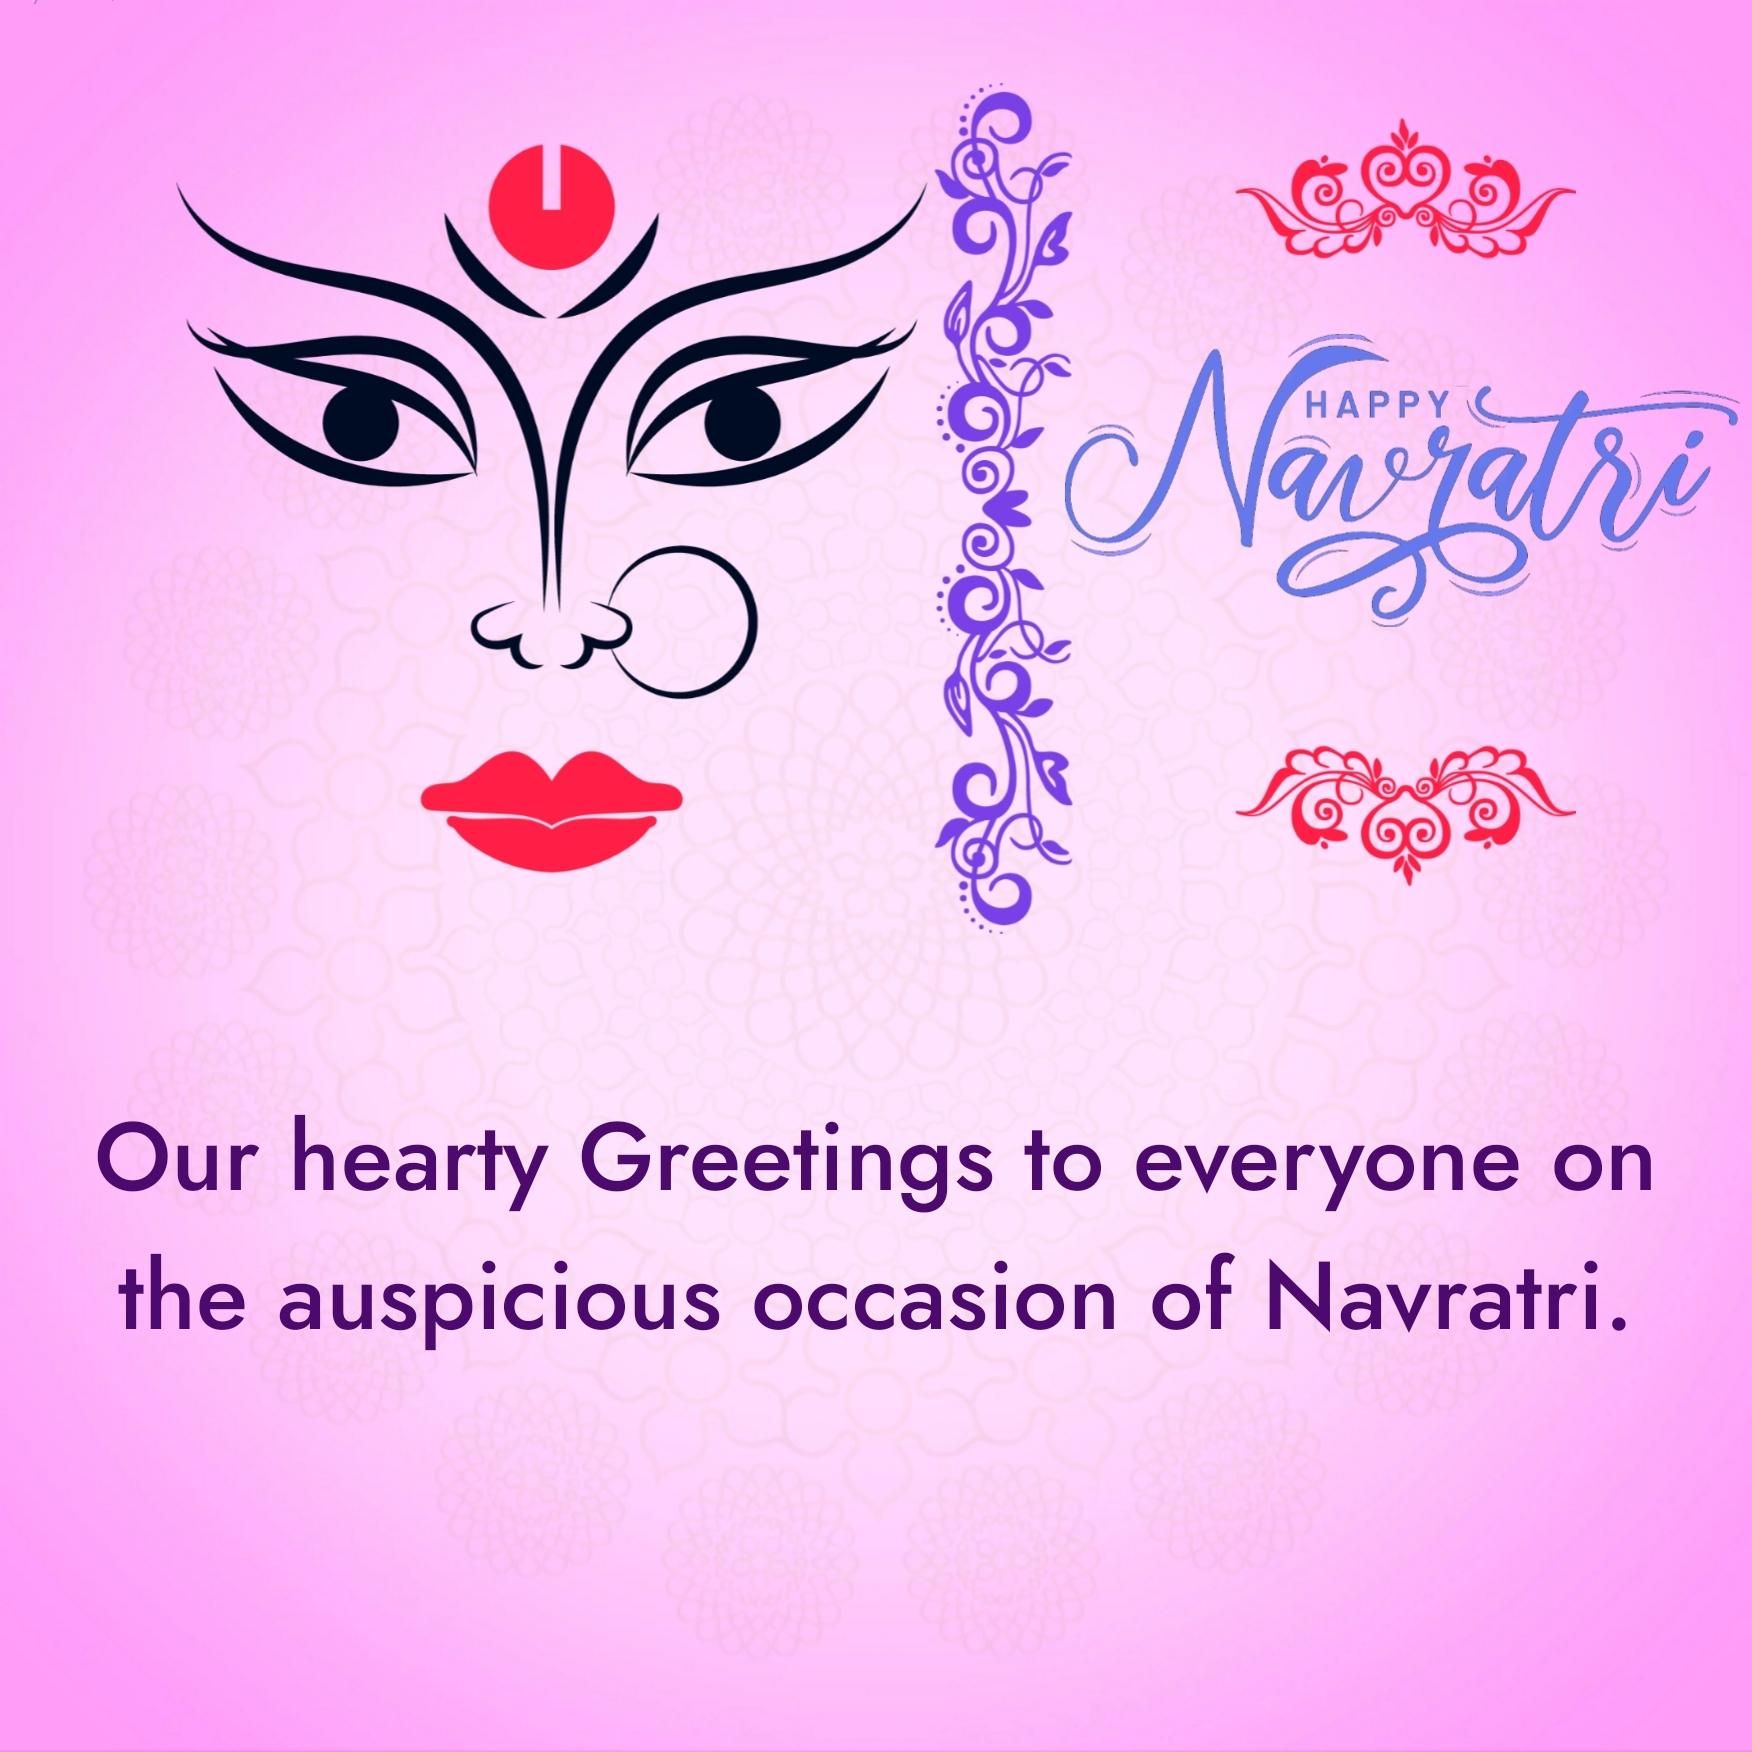 Our hearty Greetings to everyone on the auspicious occasion